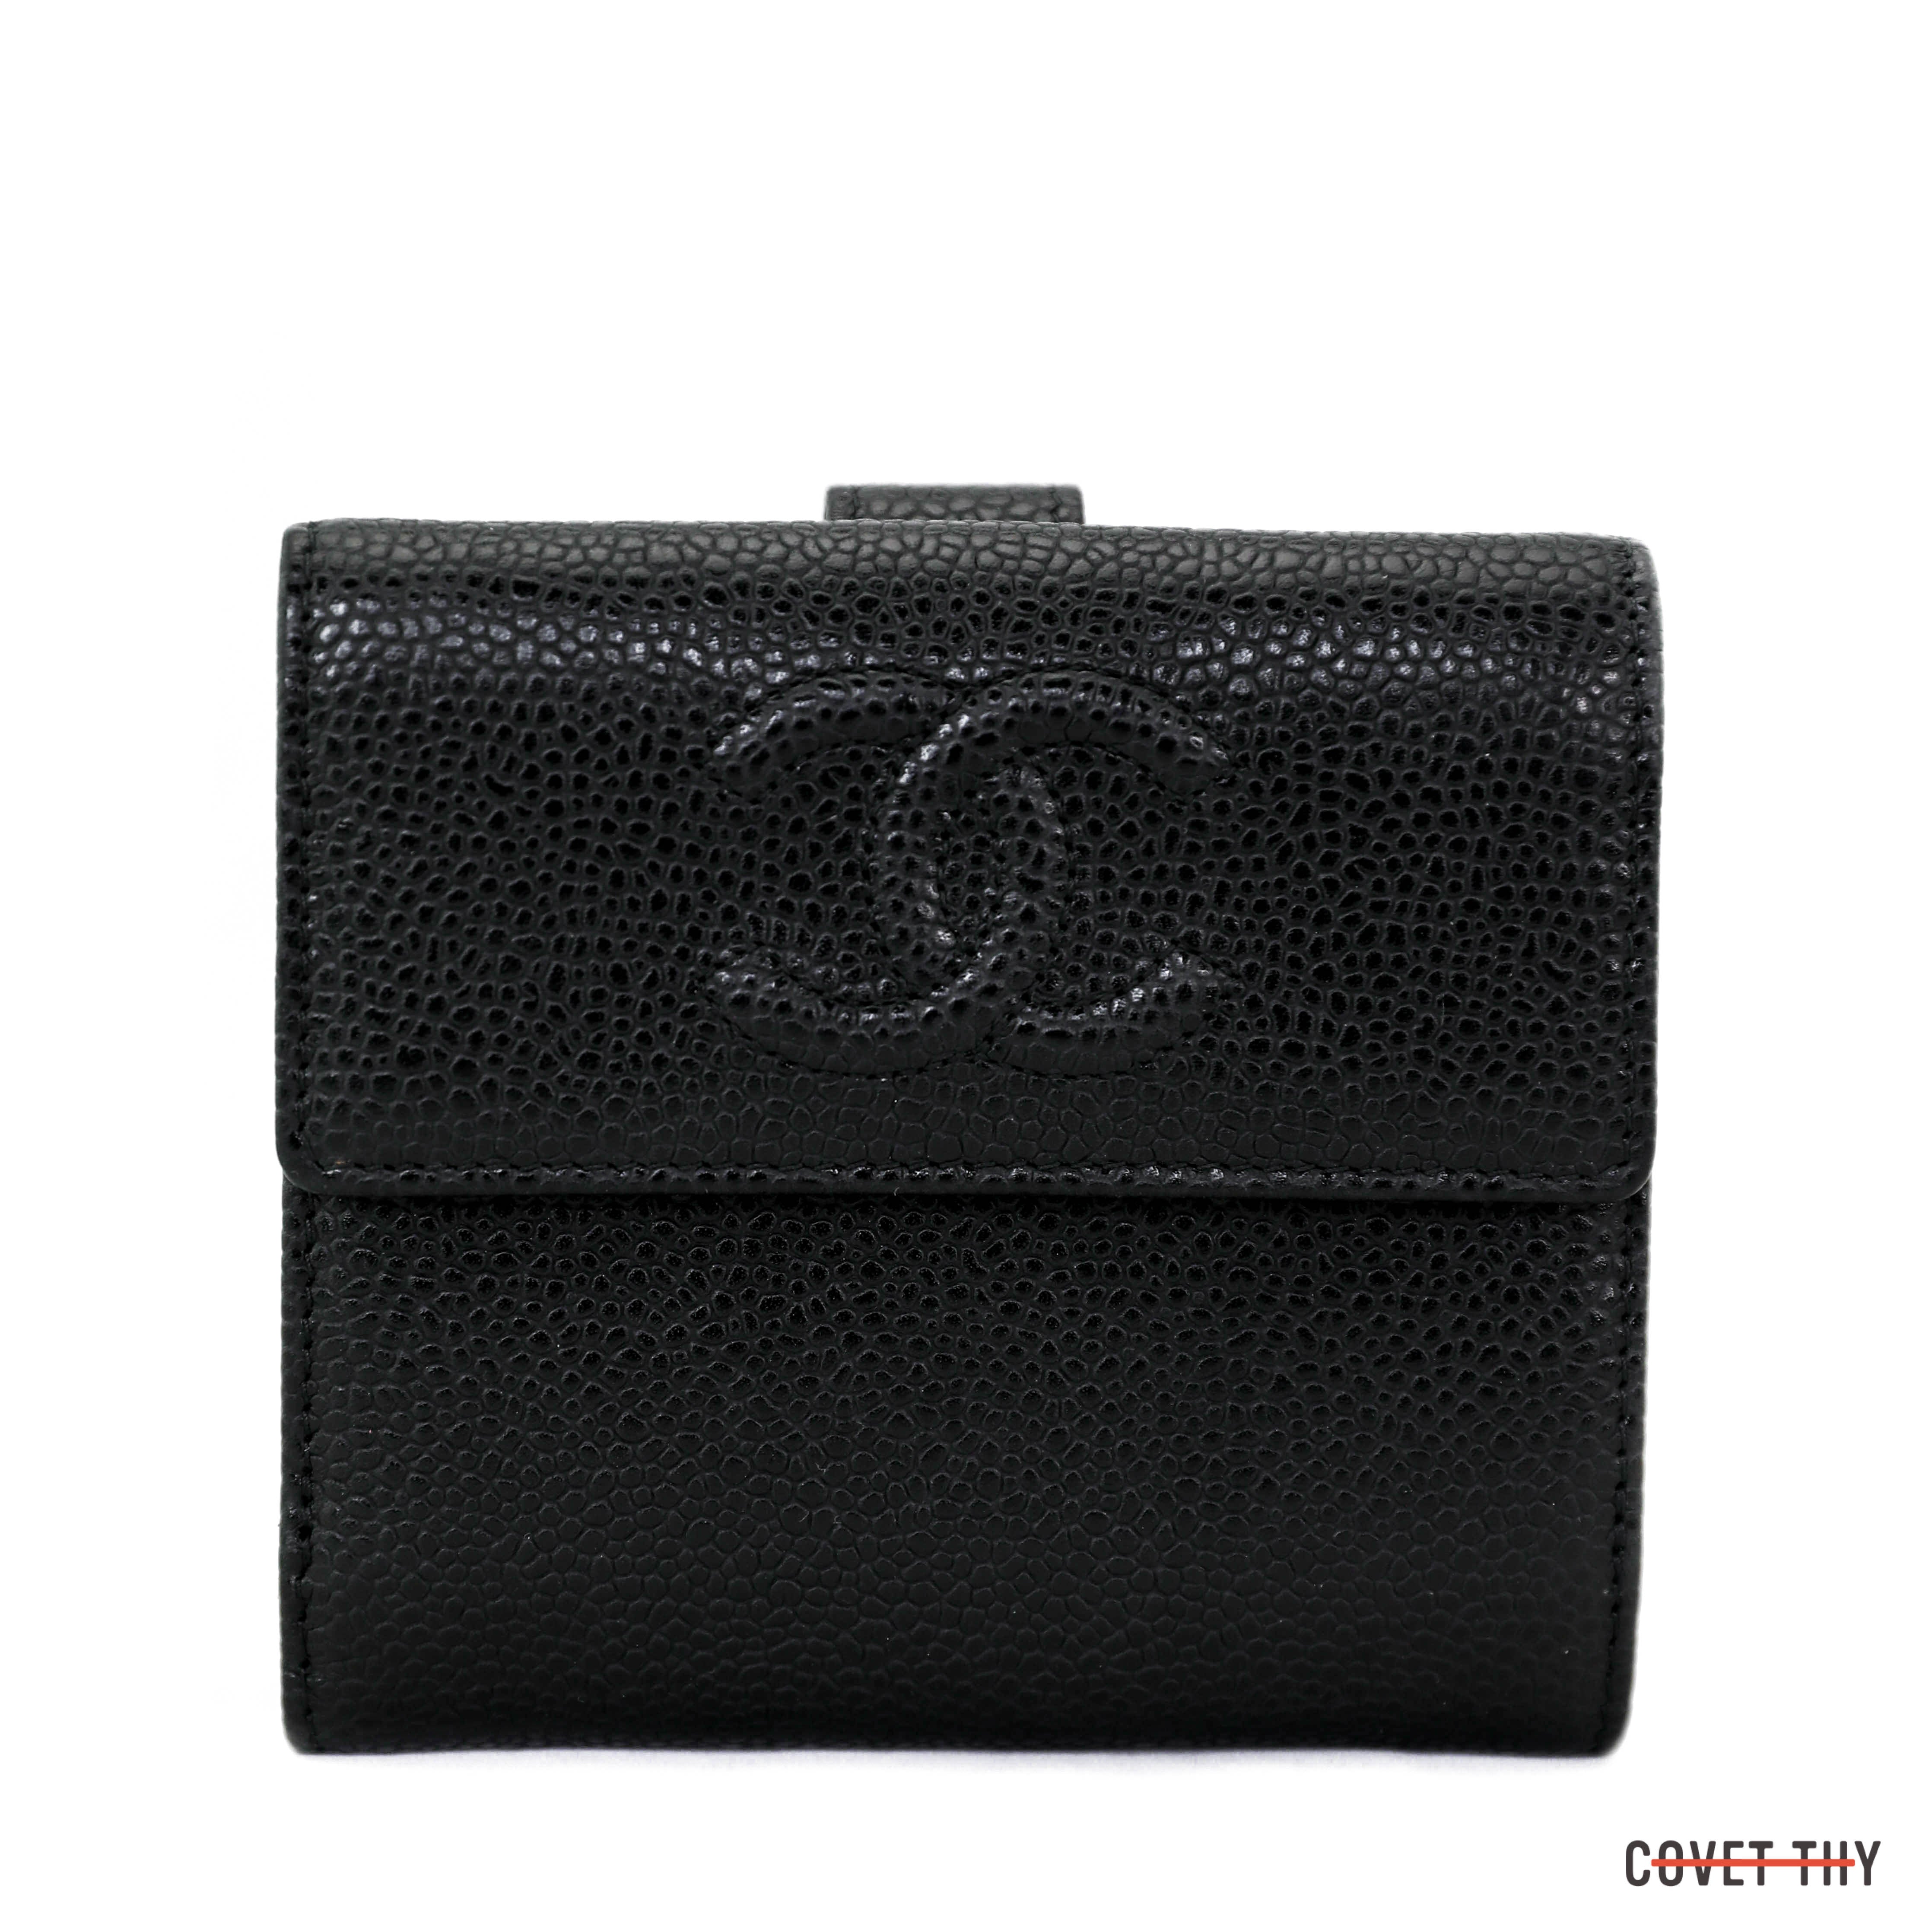 CHANEL Black Leather Wallets for Women for sale